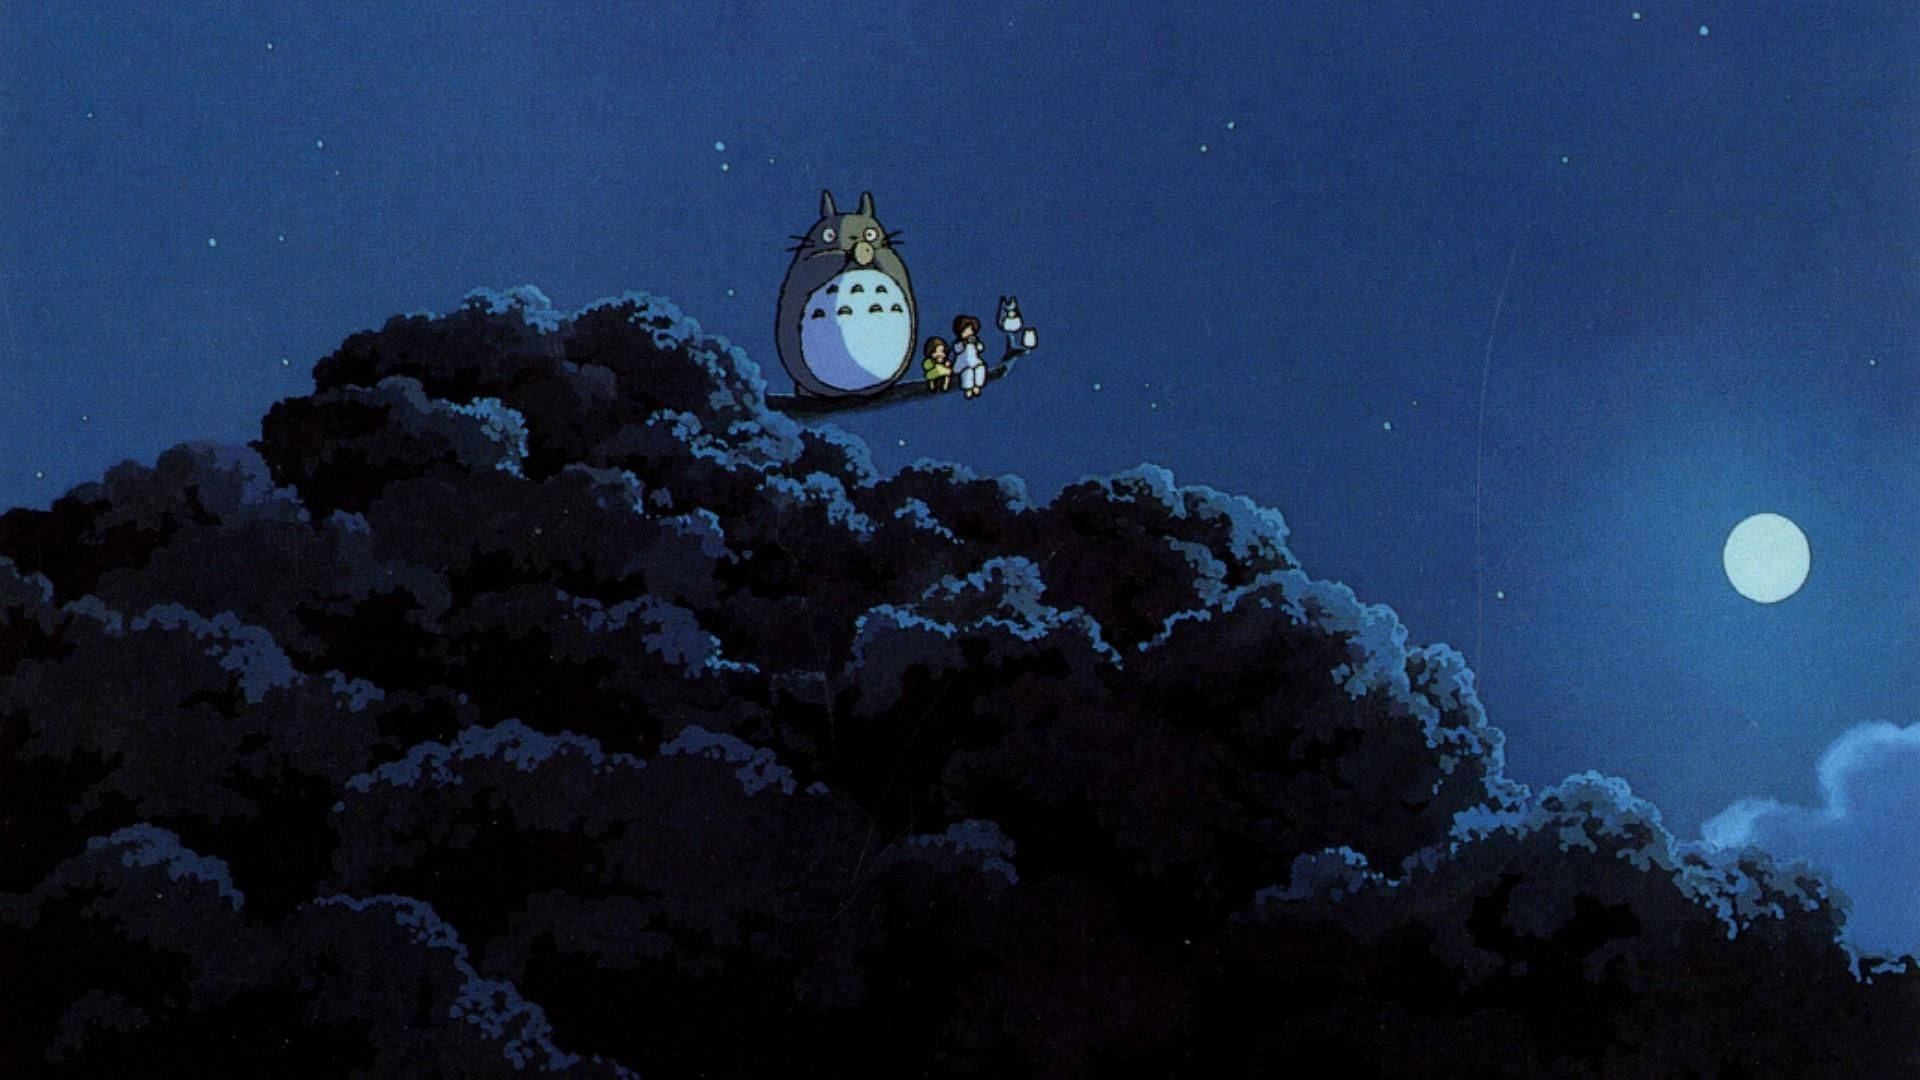 Follow the Catbus to discover the magical world of My Neighbor Totoro Wallpaper